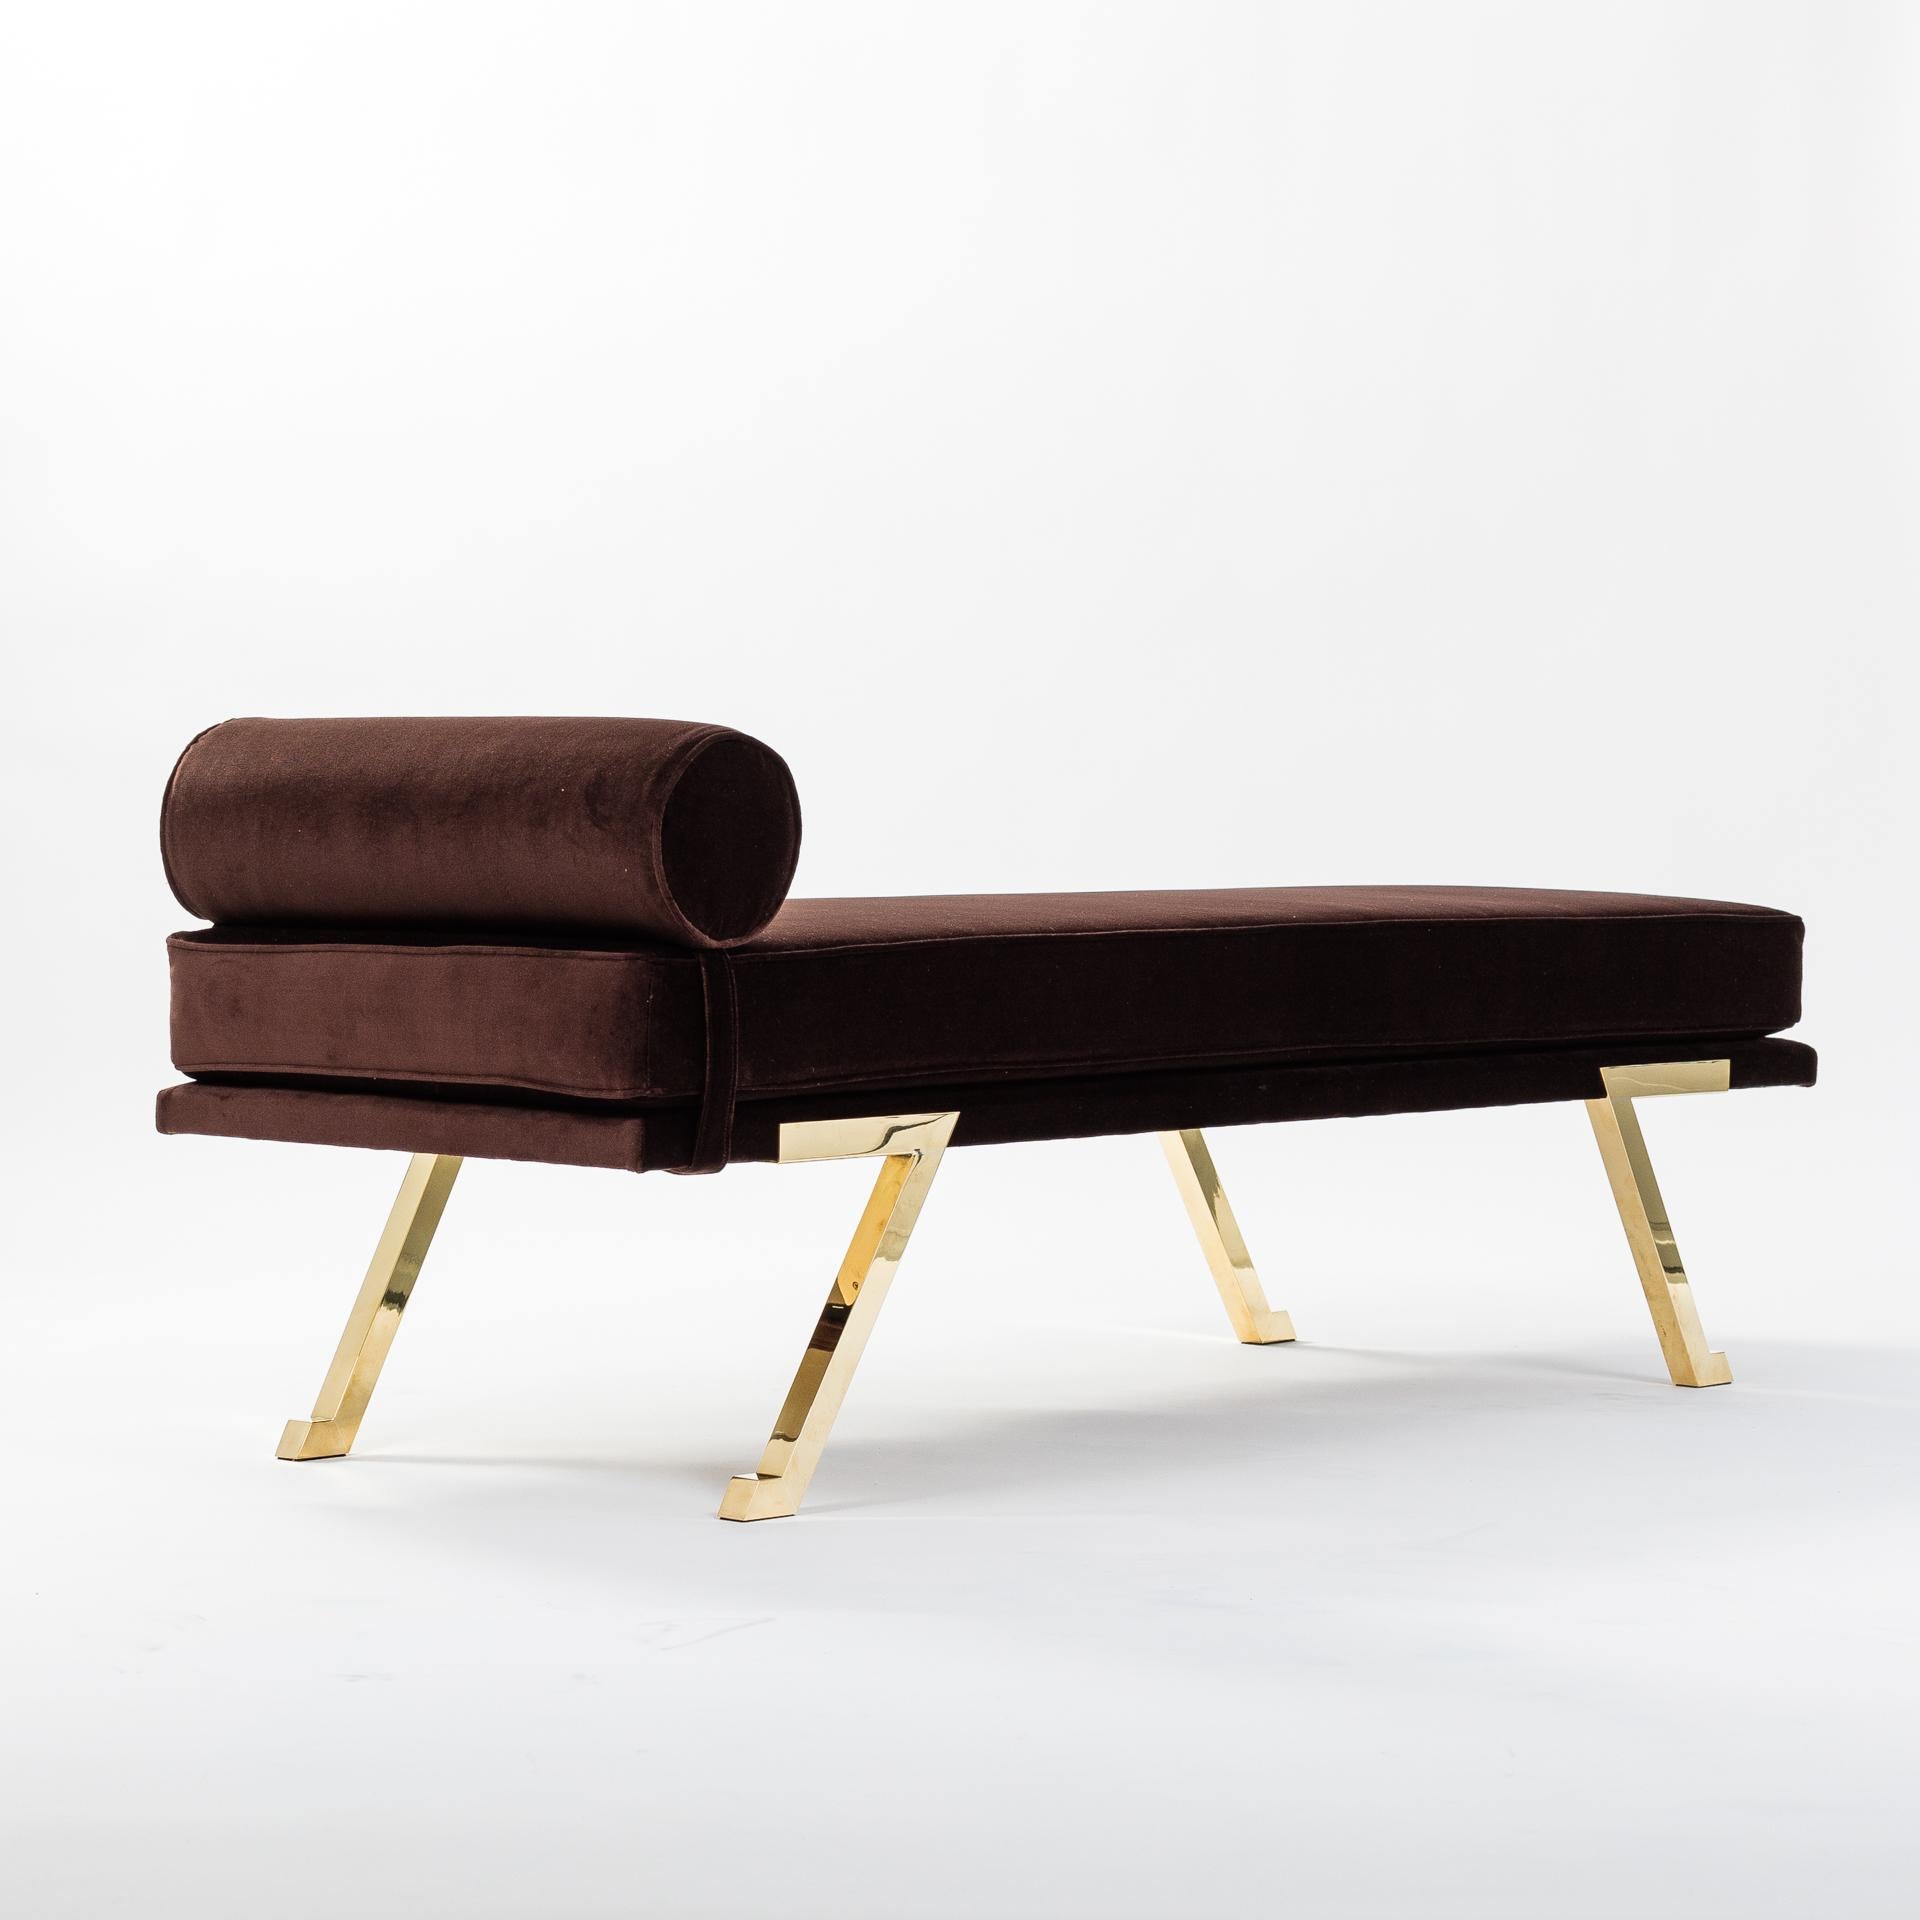 Italian Mid-Century Daybed / Bench Brass Legs, Chocolate Brown Velvet 1970s For Sale 1